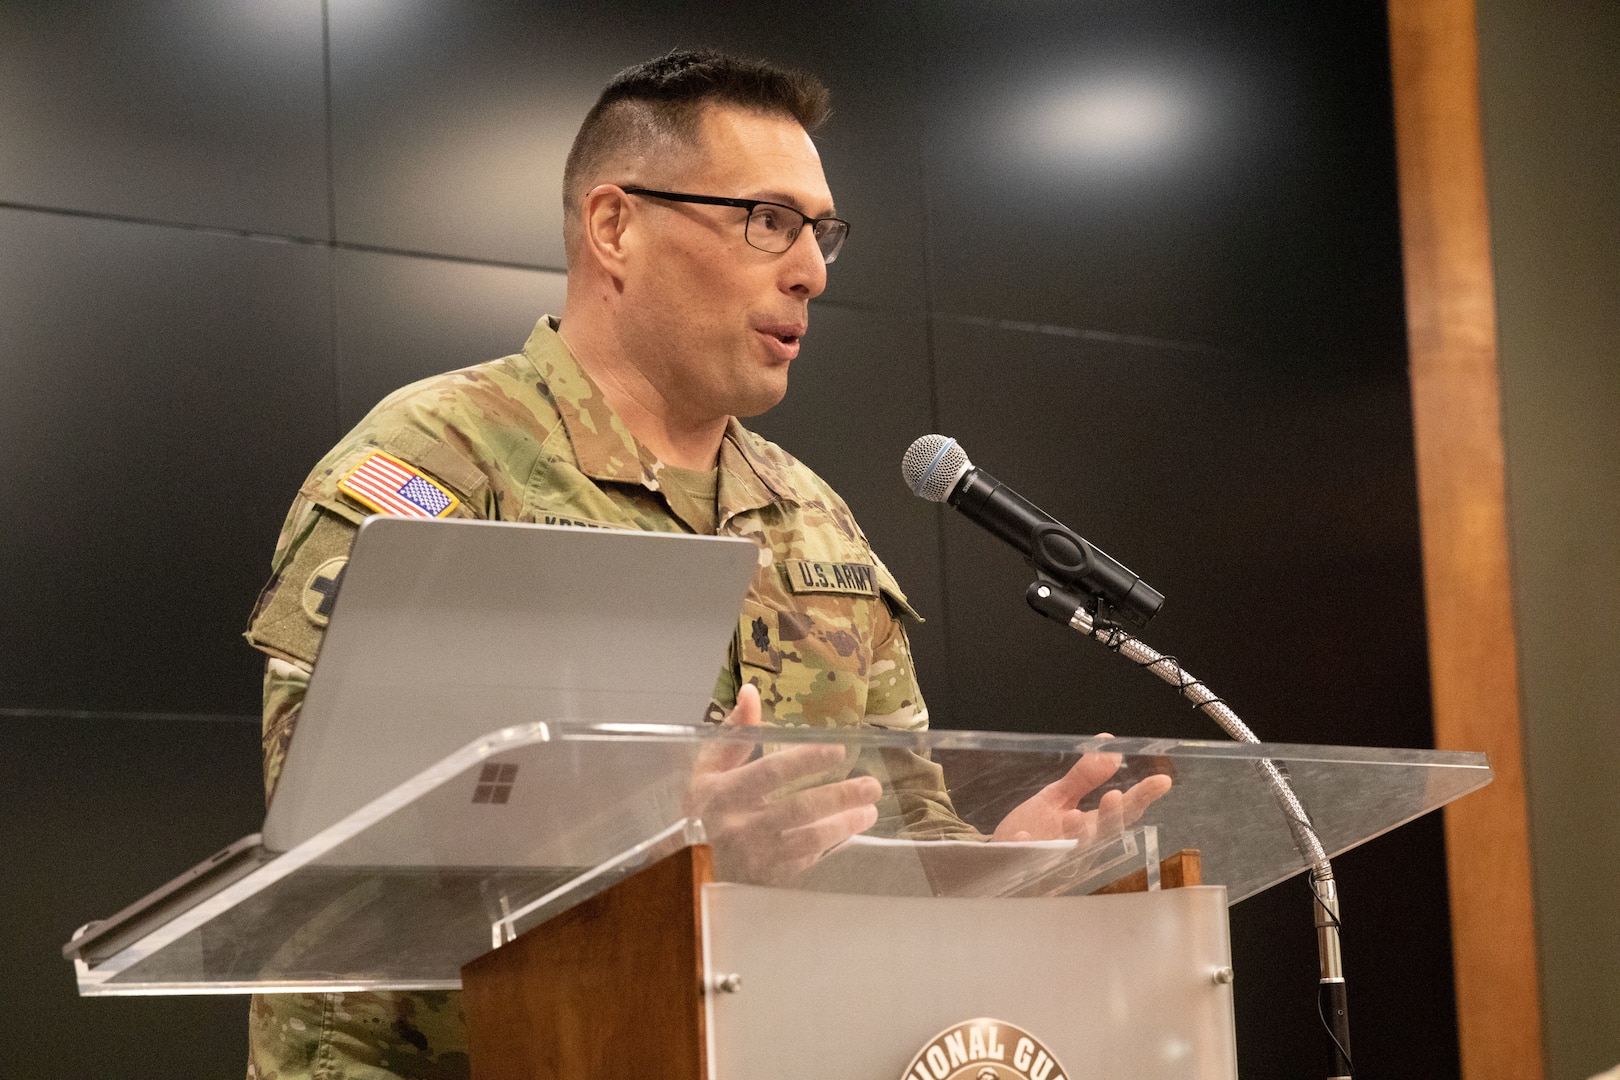 Lt. Col. Nicholas Krzensinki, staff officer in the Illinois Army National Guard Headquarters’ Plans, Operations, and Training Directorate (G3) addressed the crowd during his promotion ceremony at the Illinois Military Academy on Camp Lincoln in Springfield on Jan. 4.